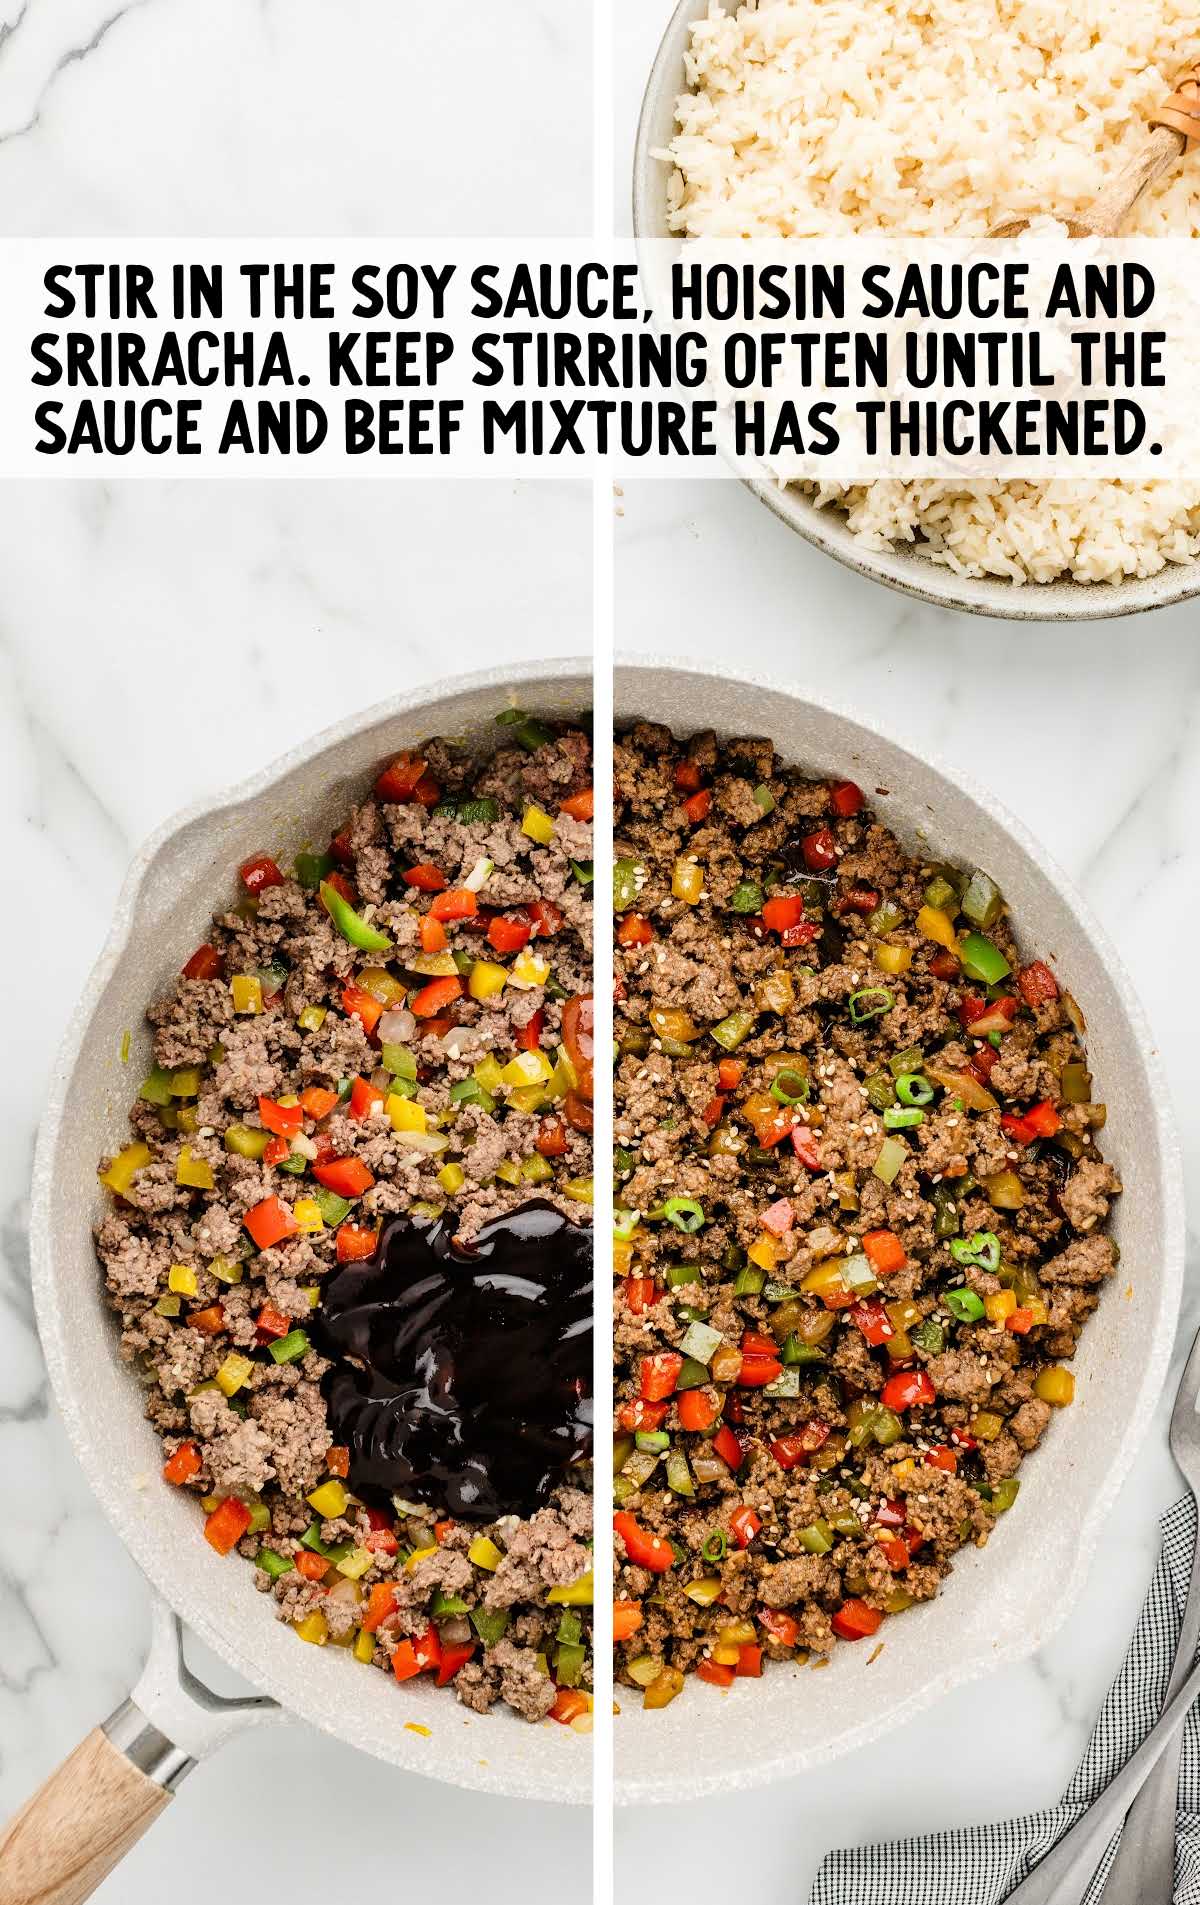 soy sauce, hoisin sauce, and sriracha added to the beef mixture in the skillet